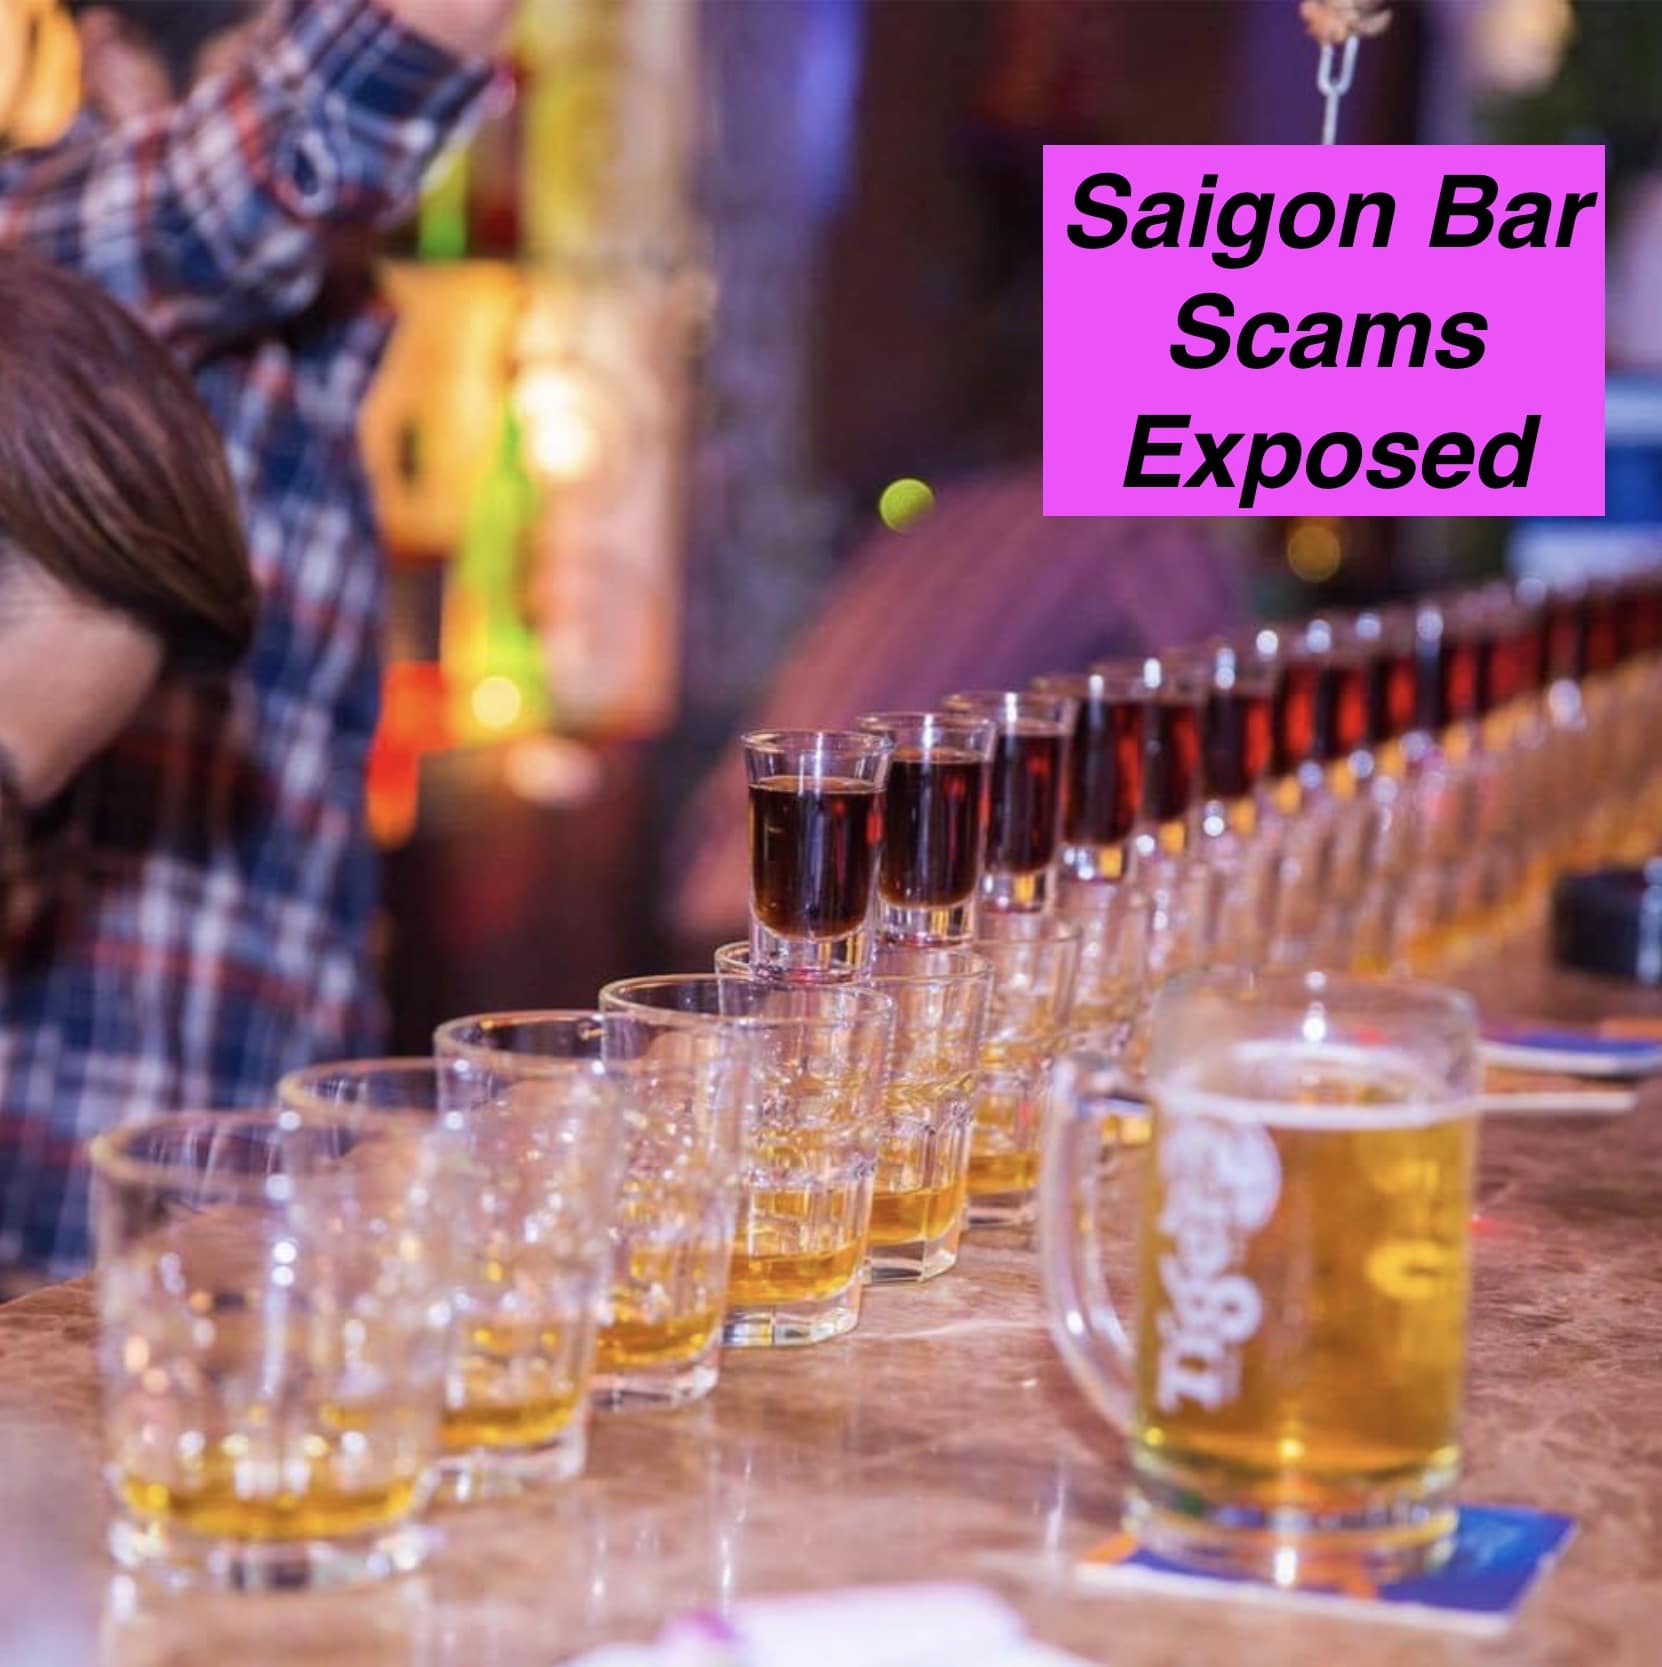 The Saigon Bar Scene Part 3 –  The Top 12 Unscrupulous Scams Exposed *BASIC FREE* HAS ACCESS TO THIS CONTENT